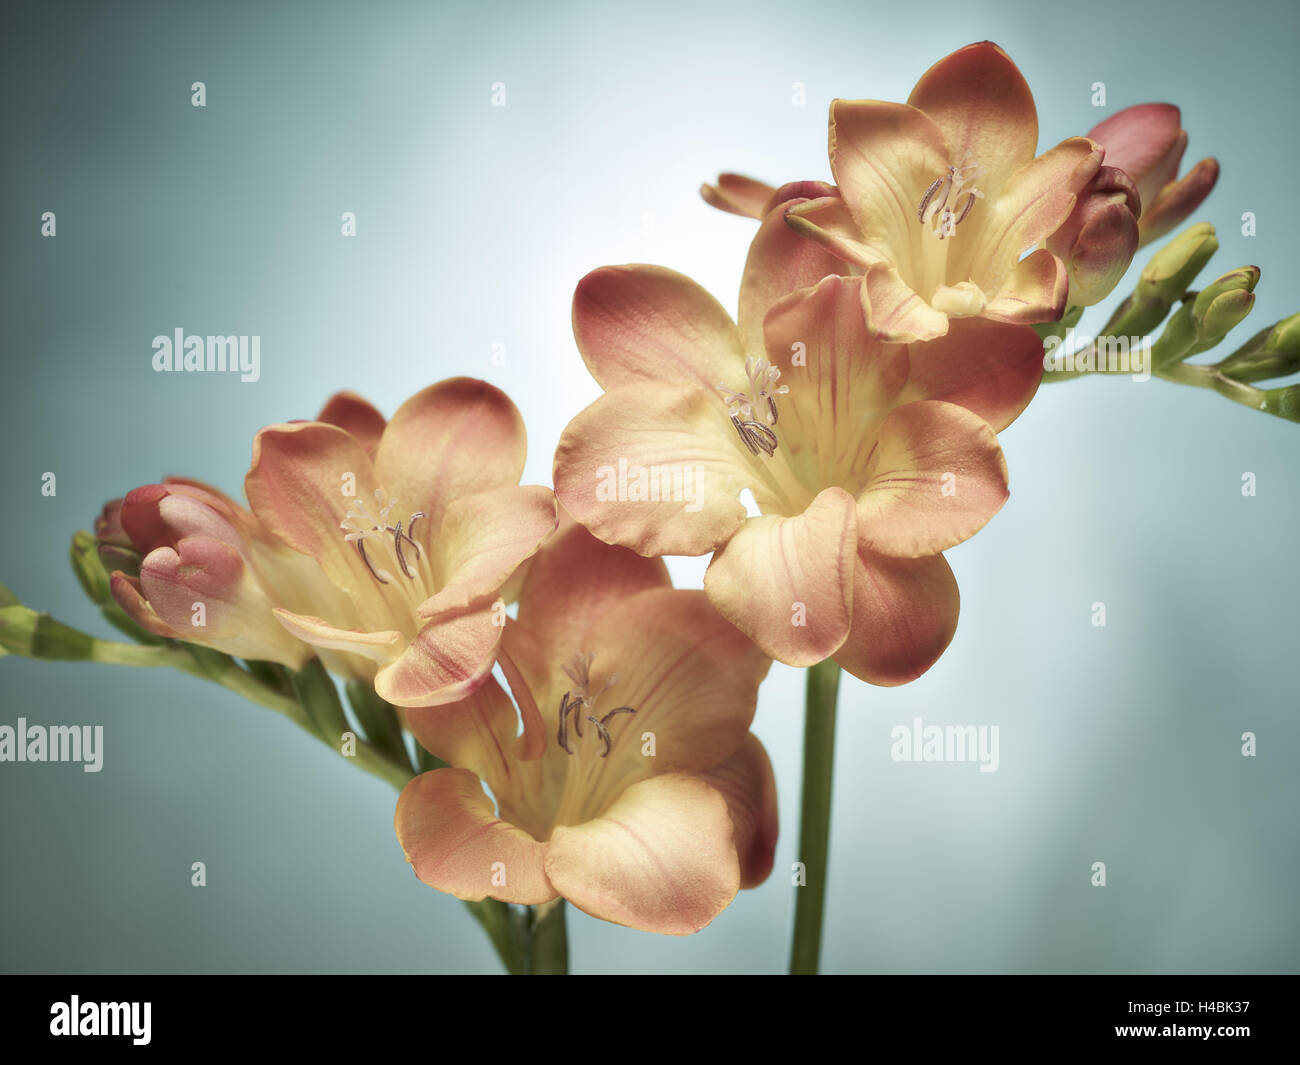 Freesia, flower, blossoms, buds, still life, pink, yellow, blue, Stock Photo